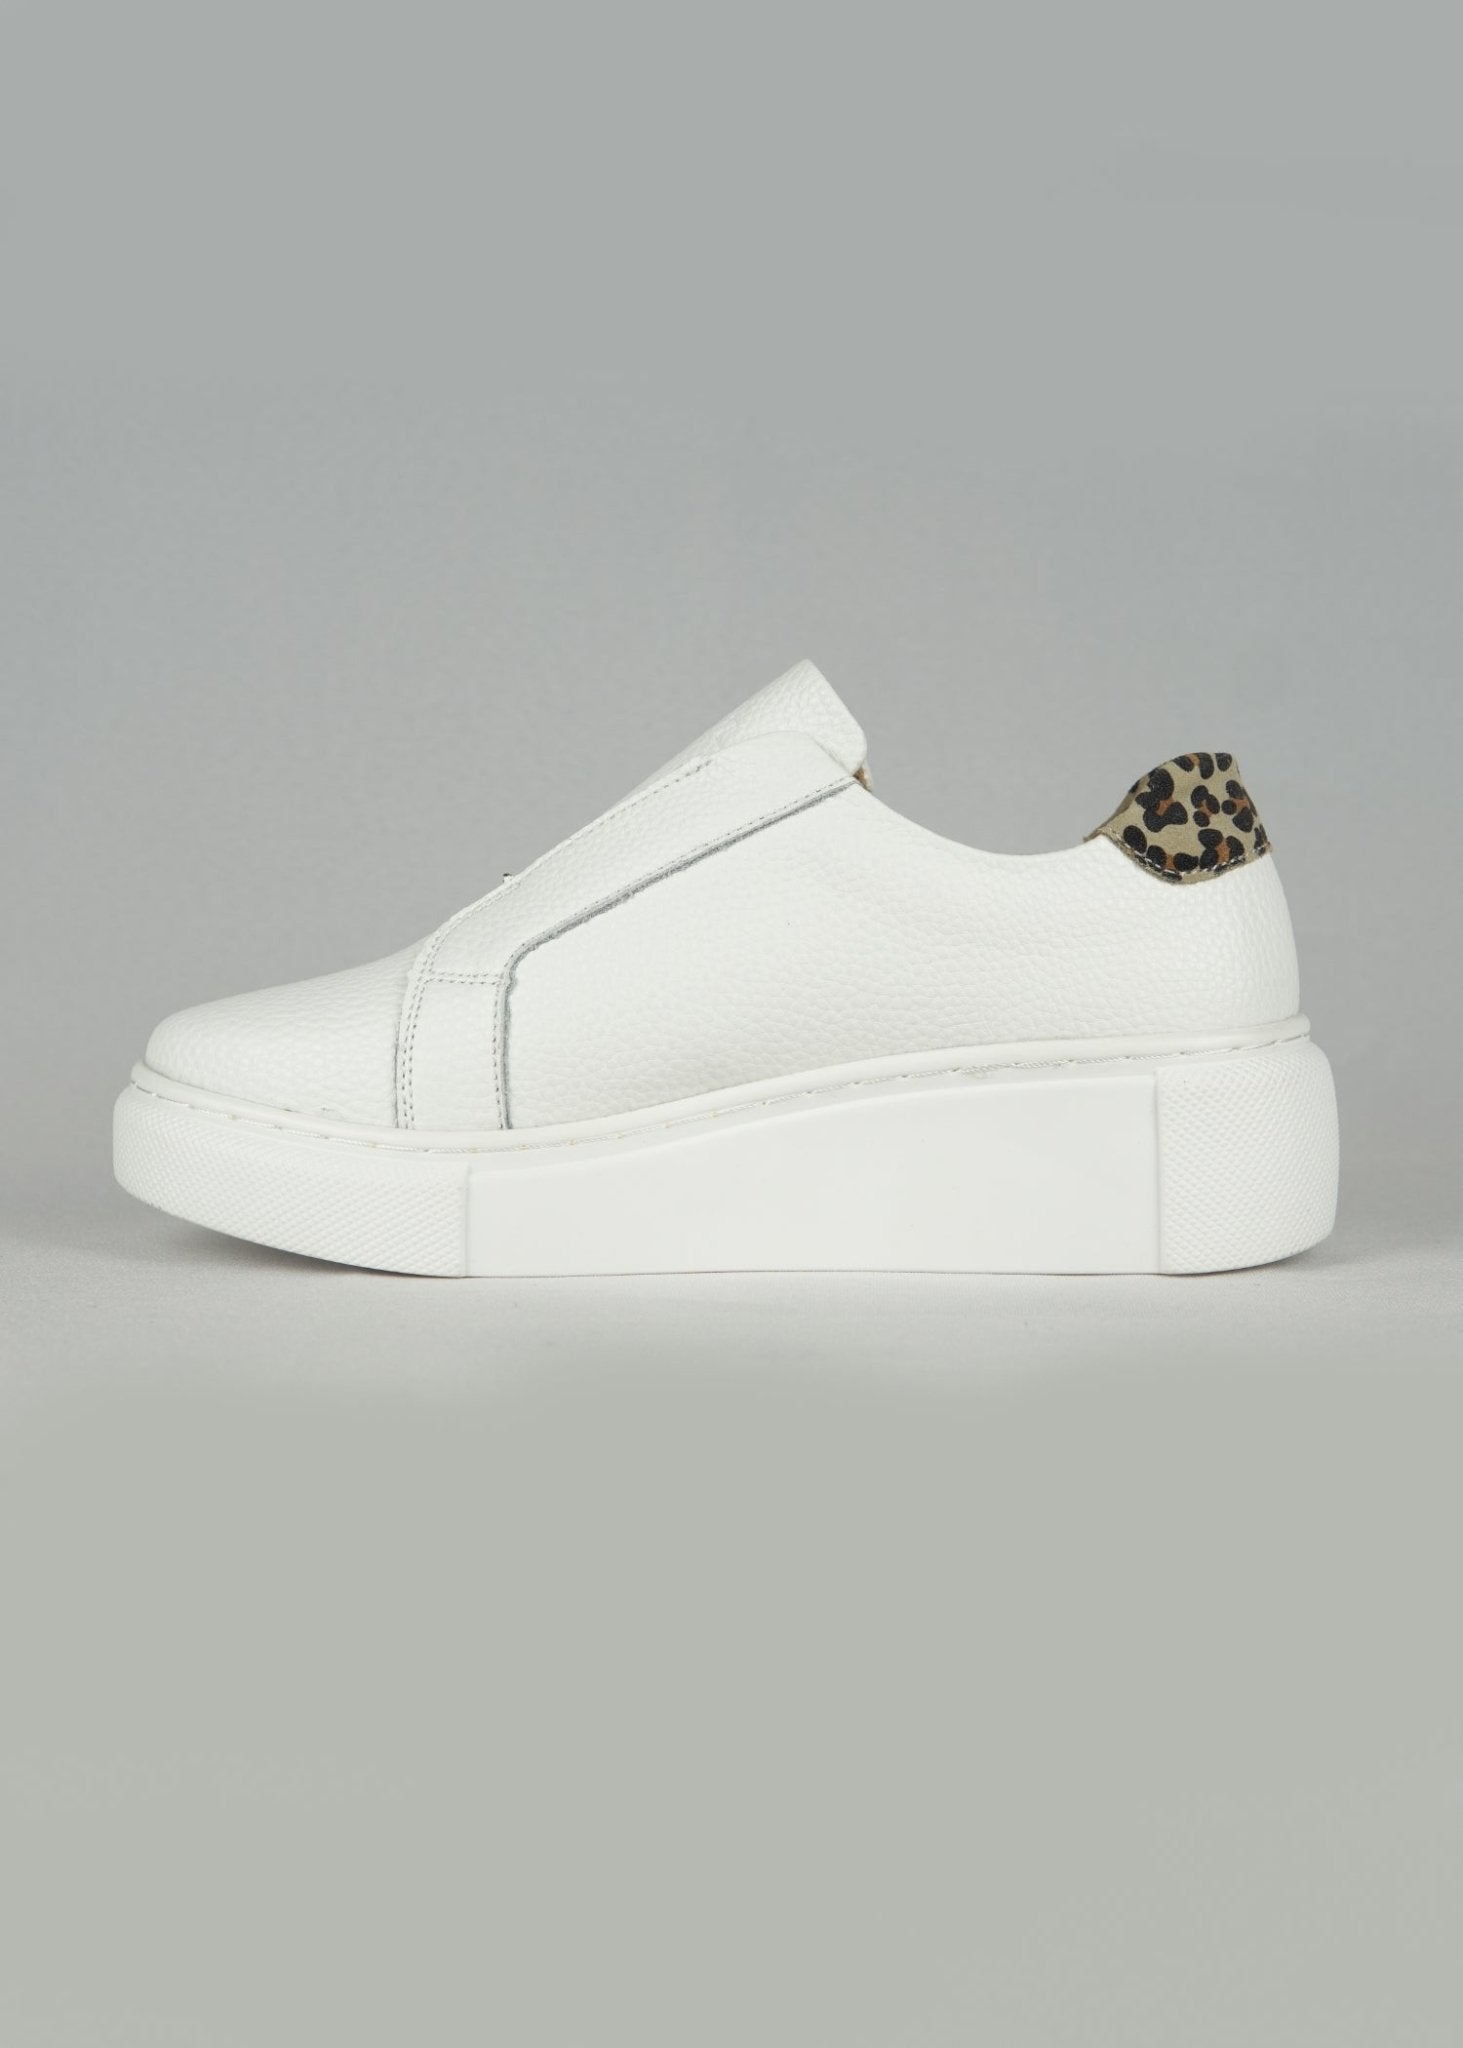 Serena Sneaker With Animal Print In White And Gold - Tribute StoreJulz